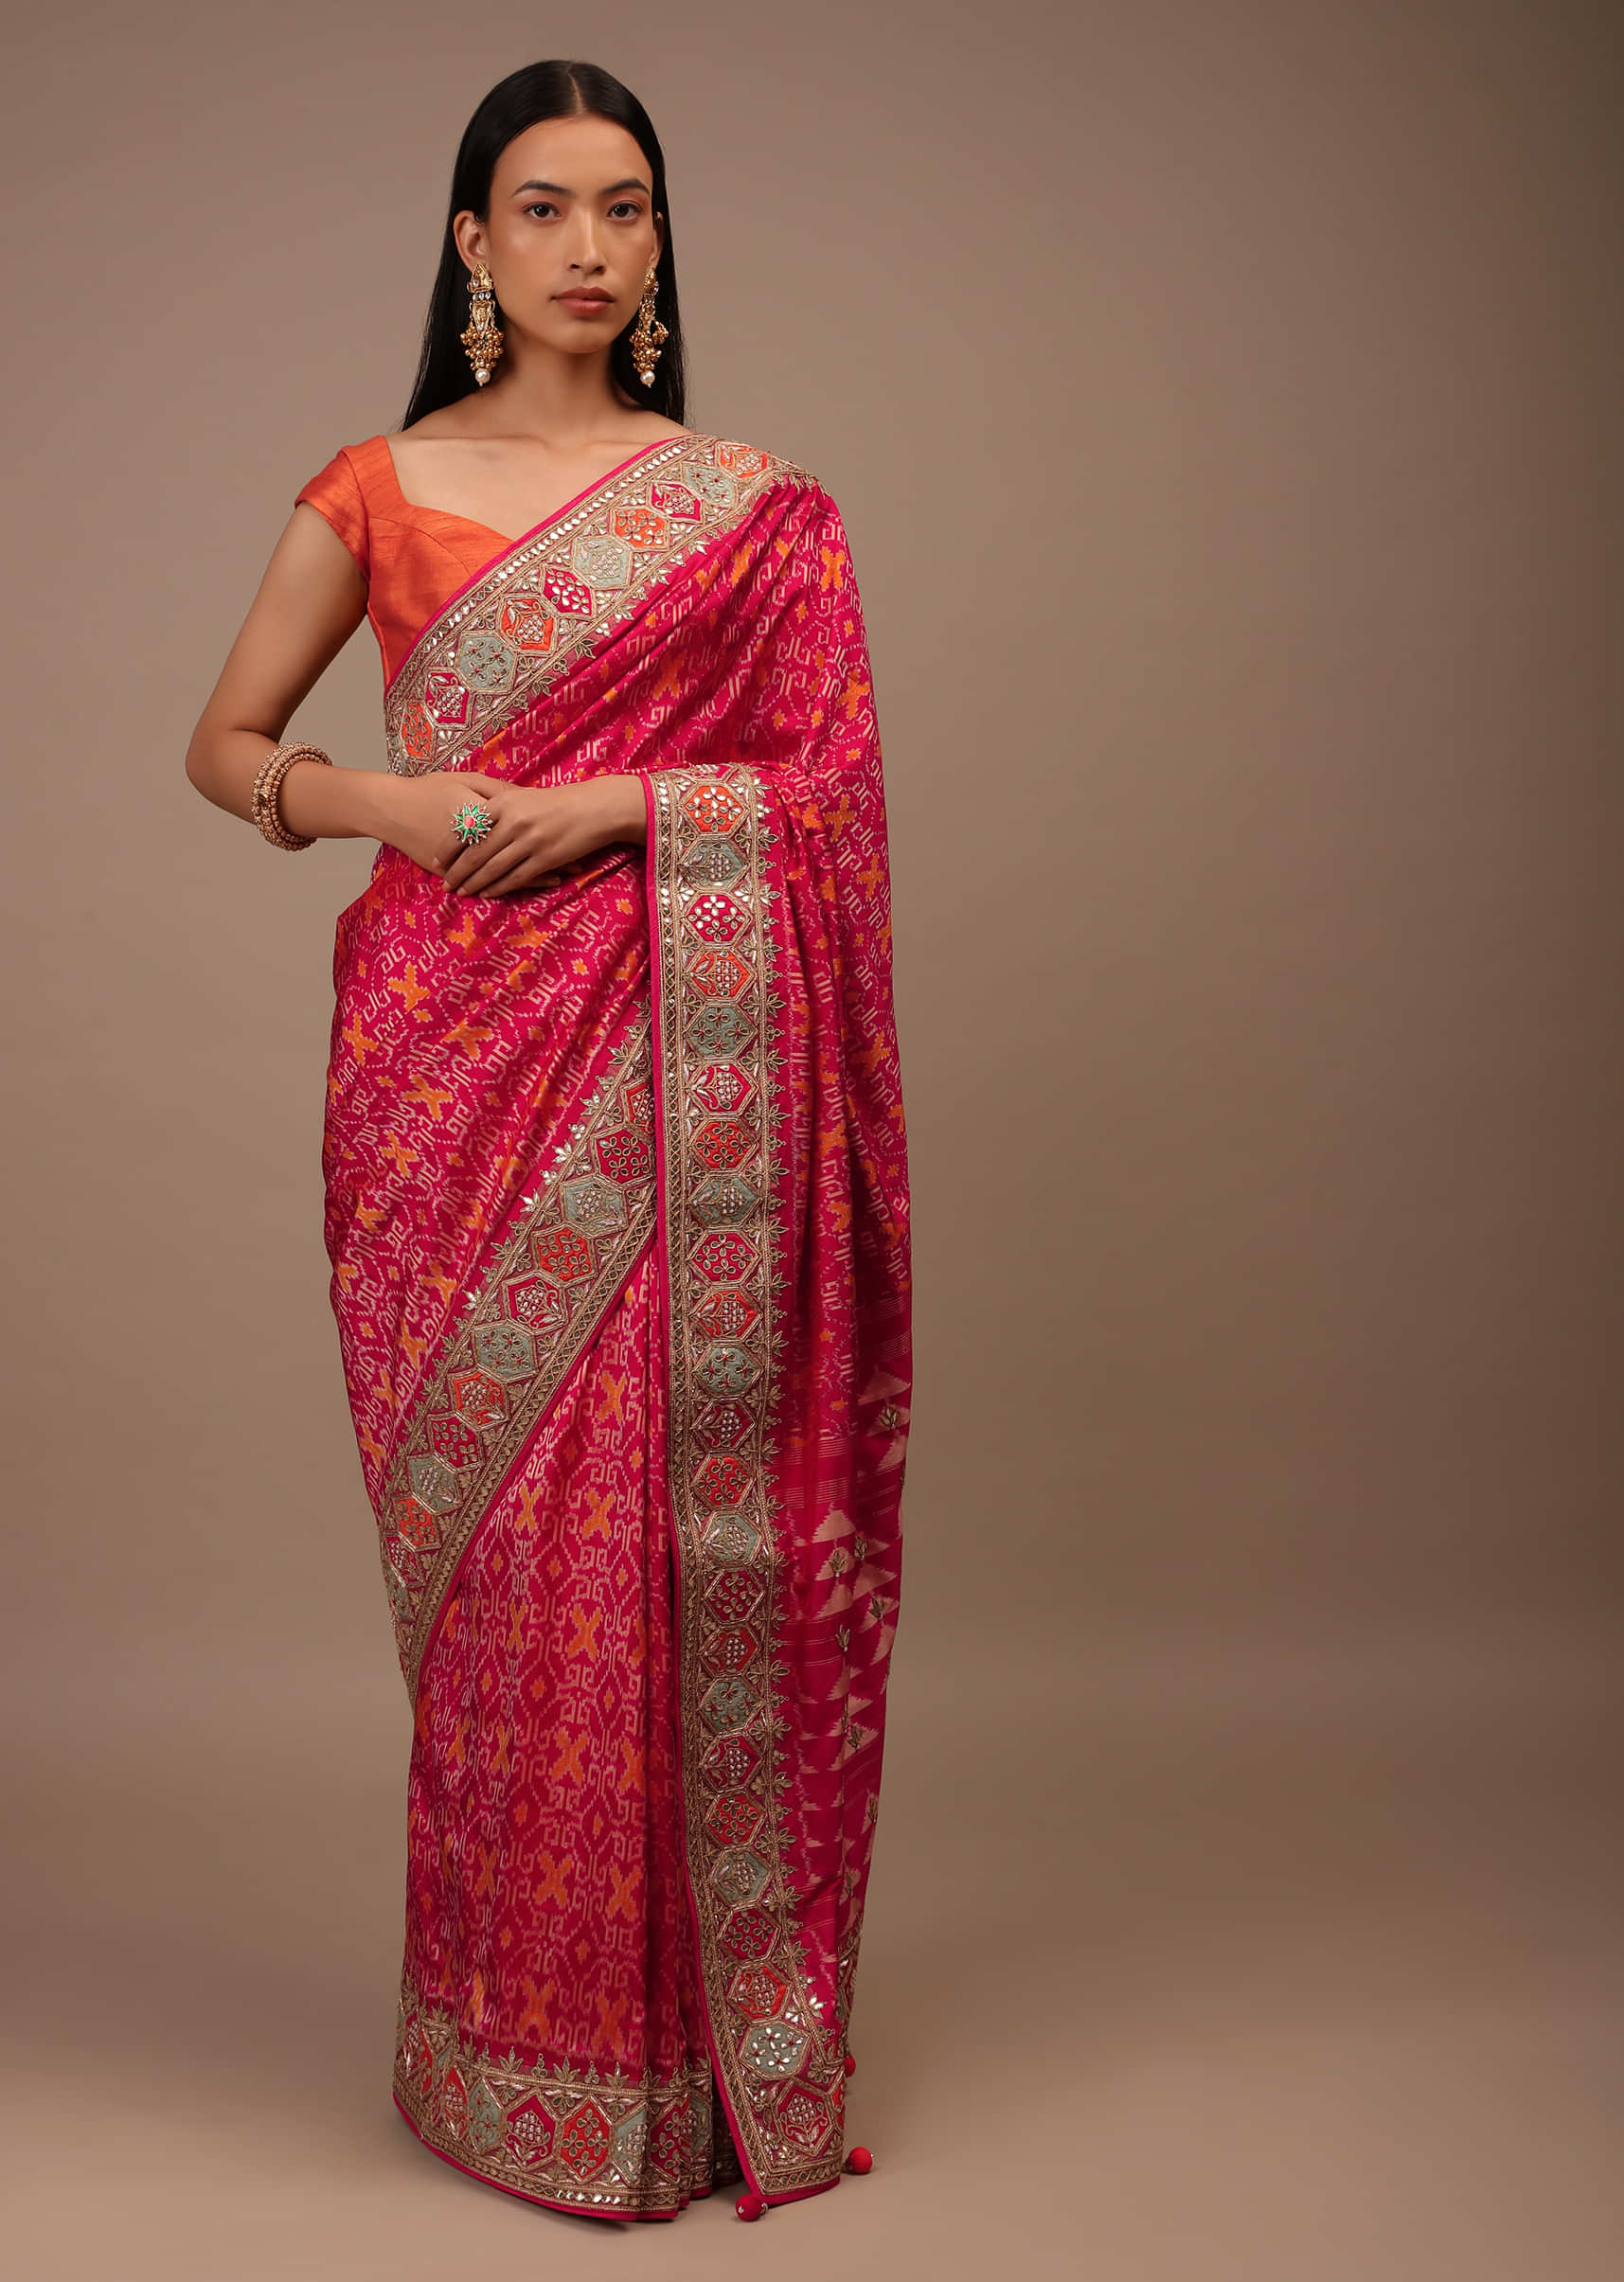 Rani Pink And Orange Two Toned Saree In Silk With Pure Patola Weave And Gotta Patti Embroidered Border